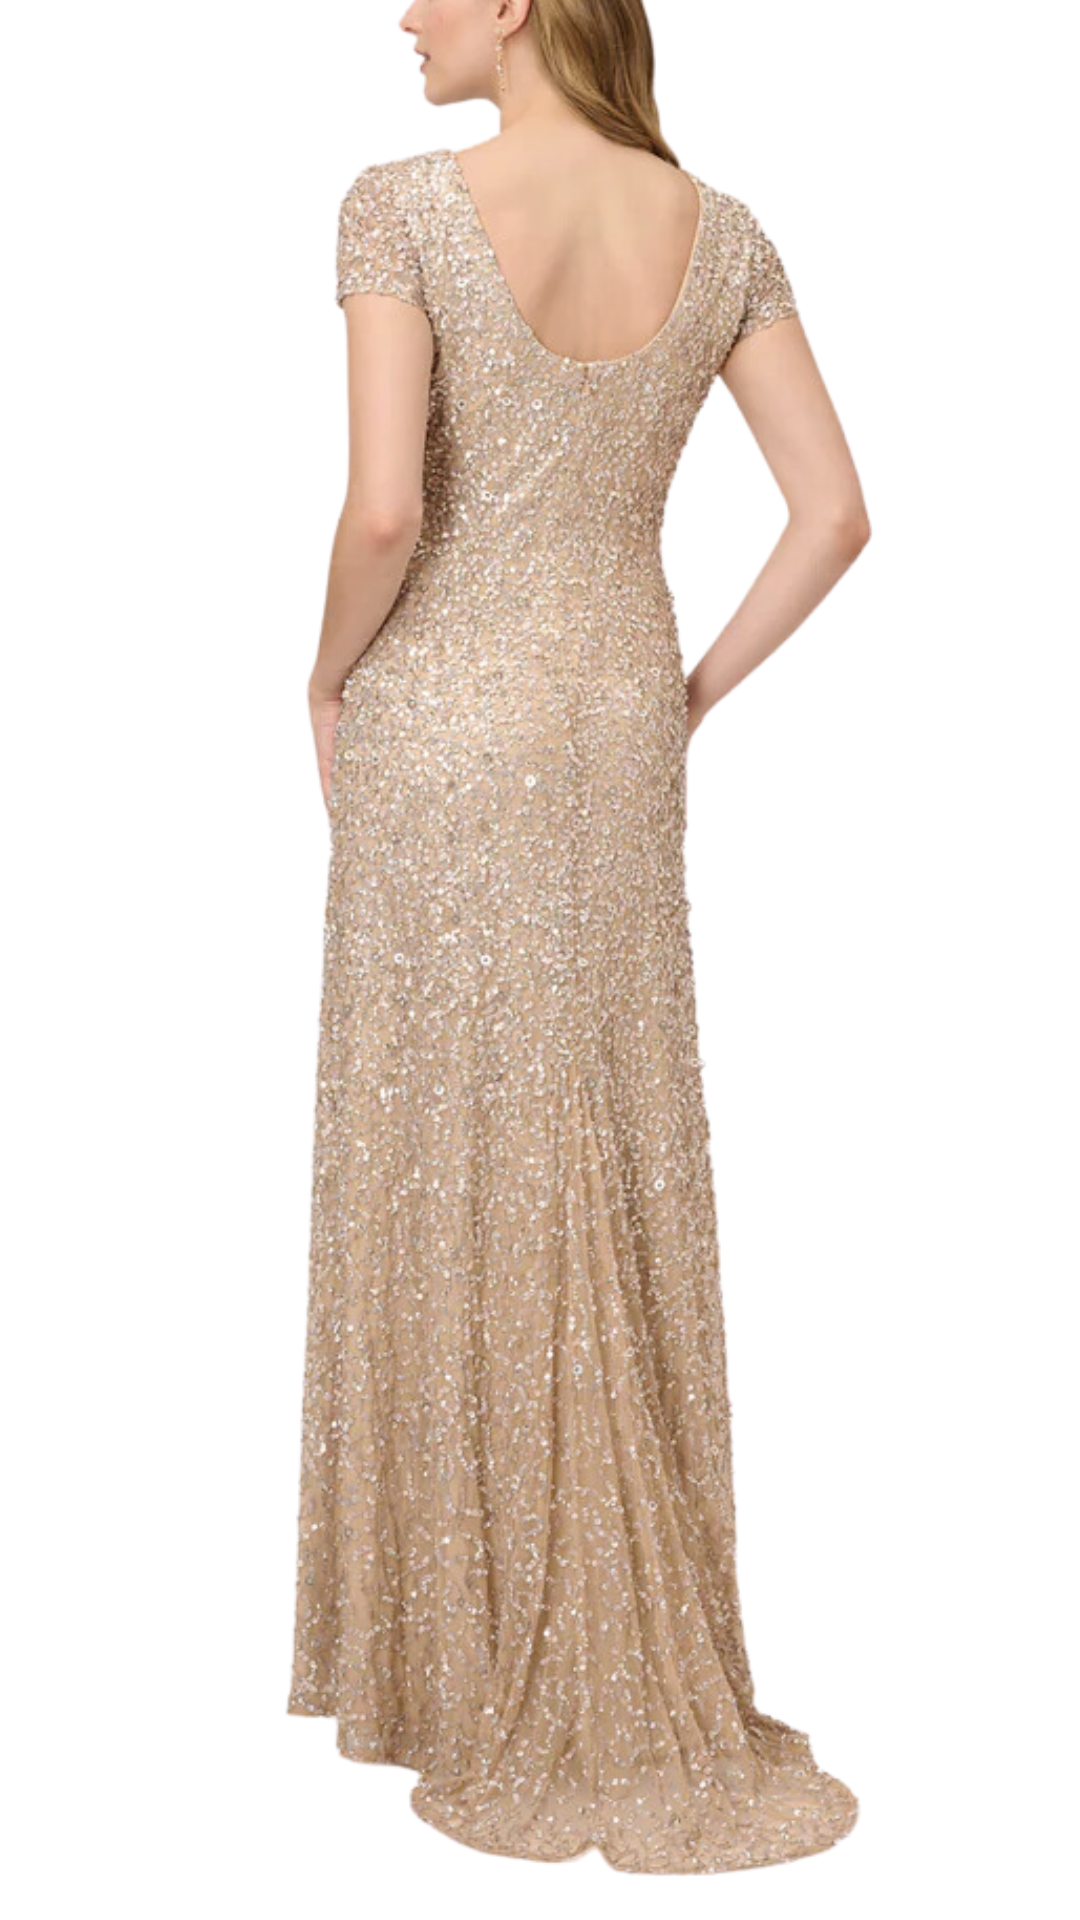 Adrianna Papell Scoop Back Sequin Gown in Champagne